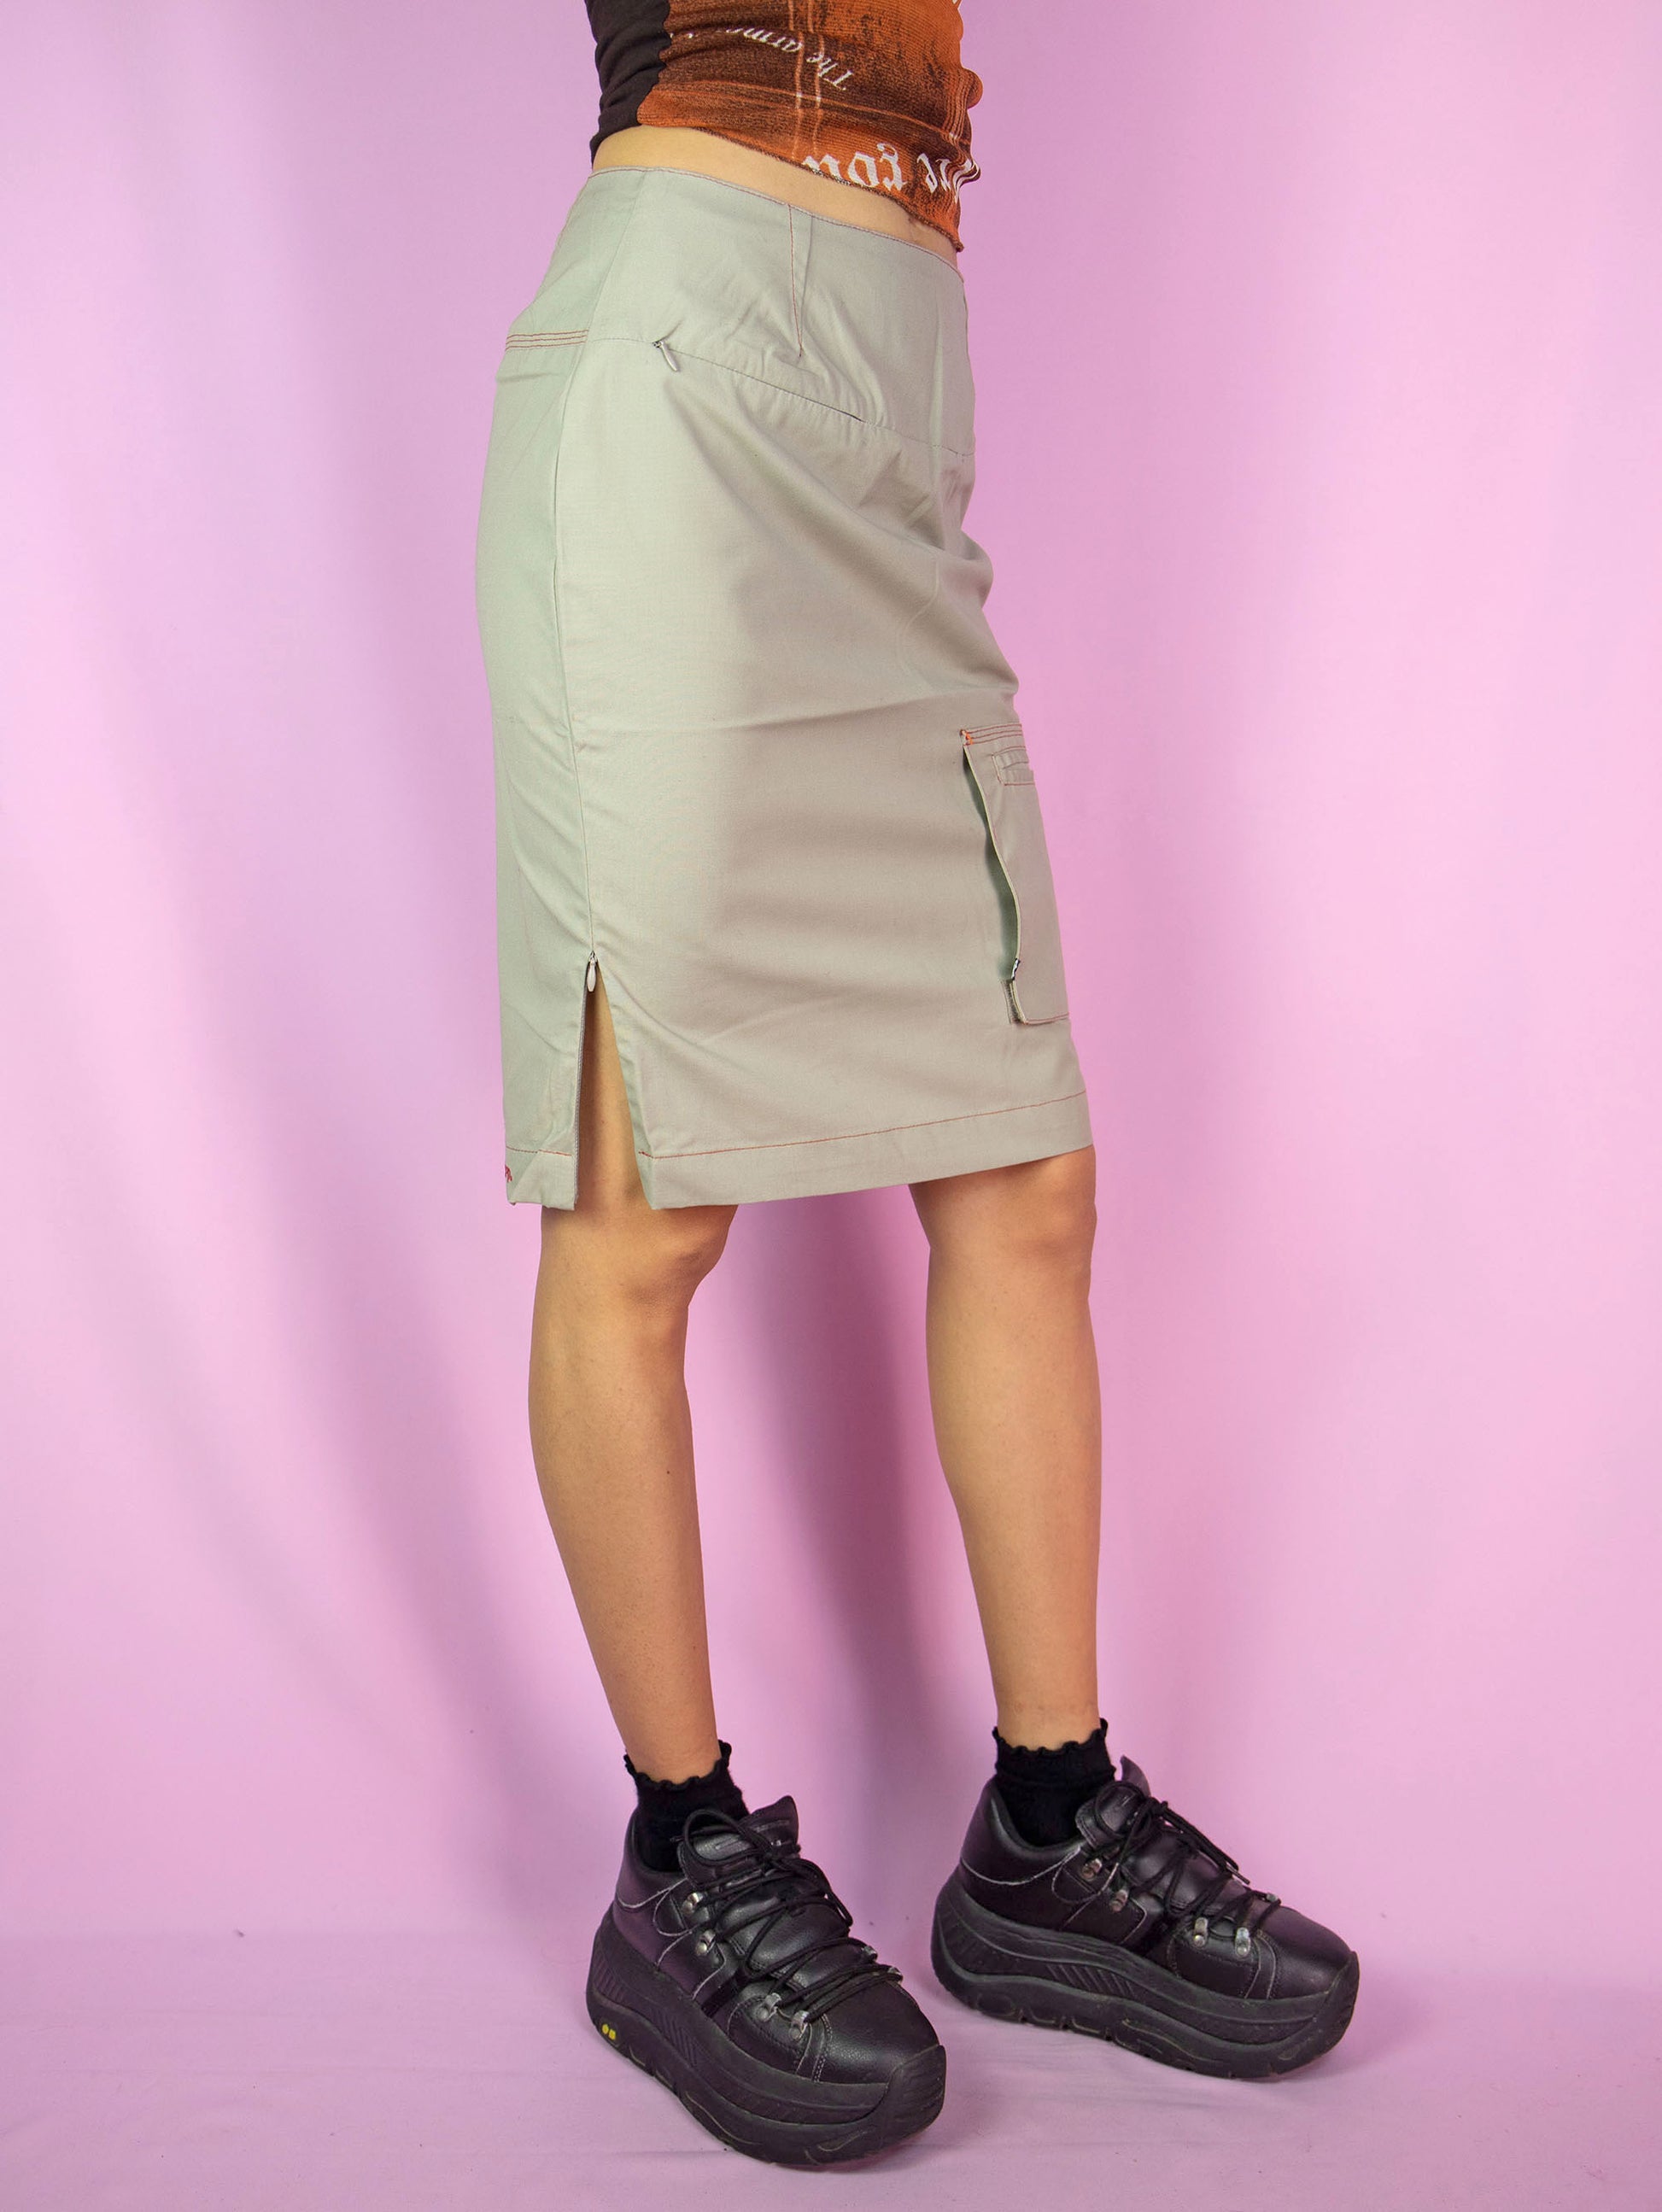 The Y2K Beige Grunge Cargo Skirt is a vintage skirt with pockets, a side zipper closure, and side slits with zippers. Cyber gorpcore 2000s utility mini skirt.